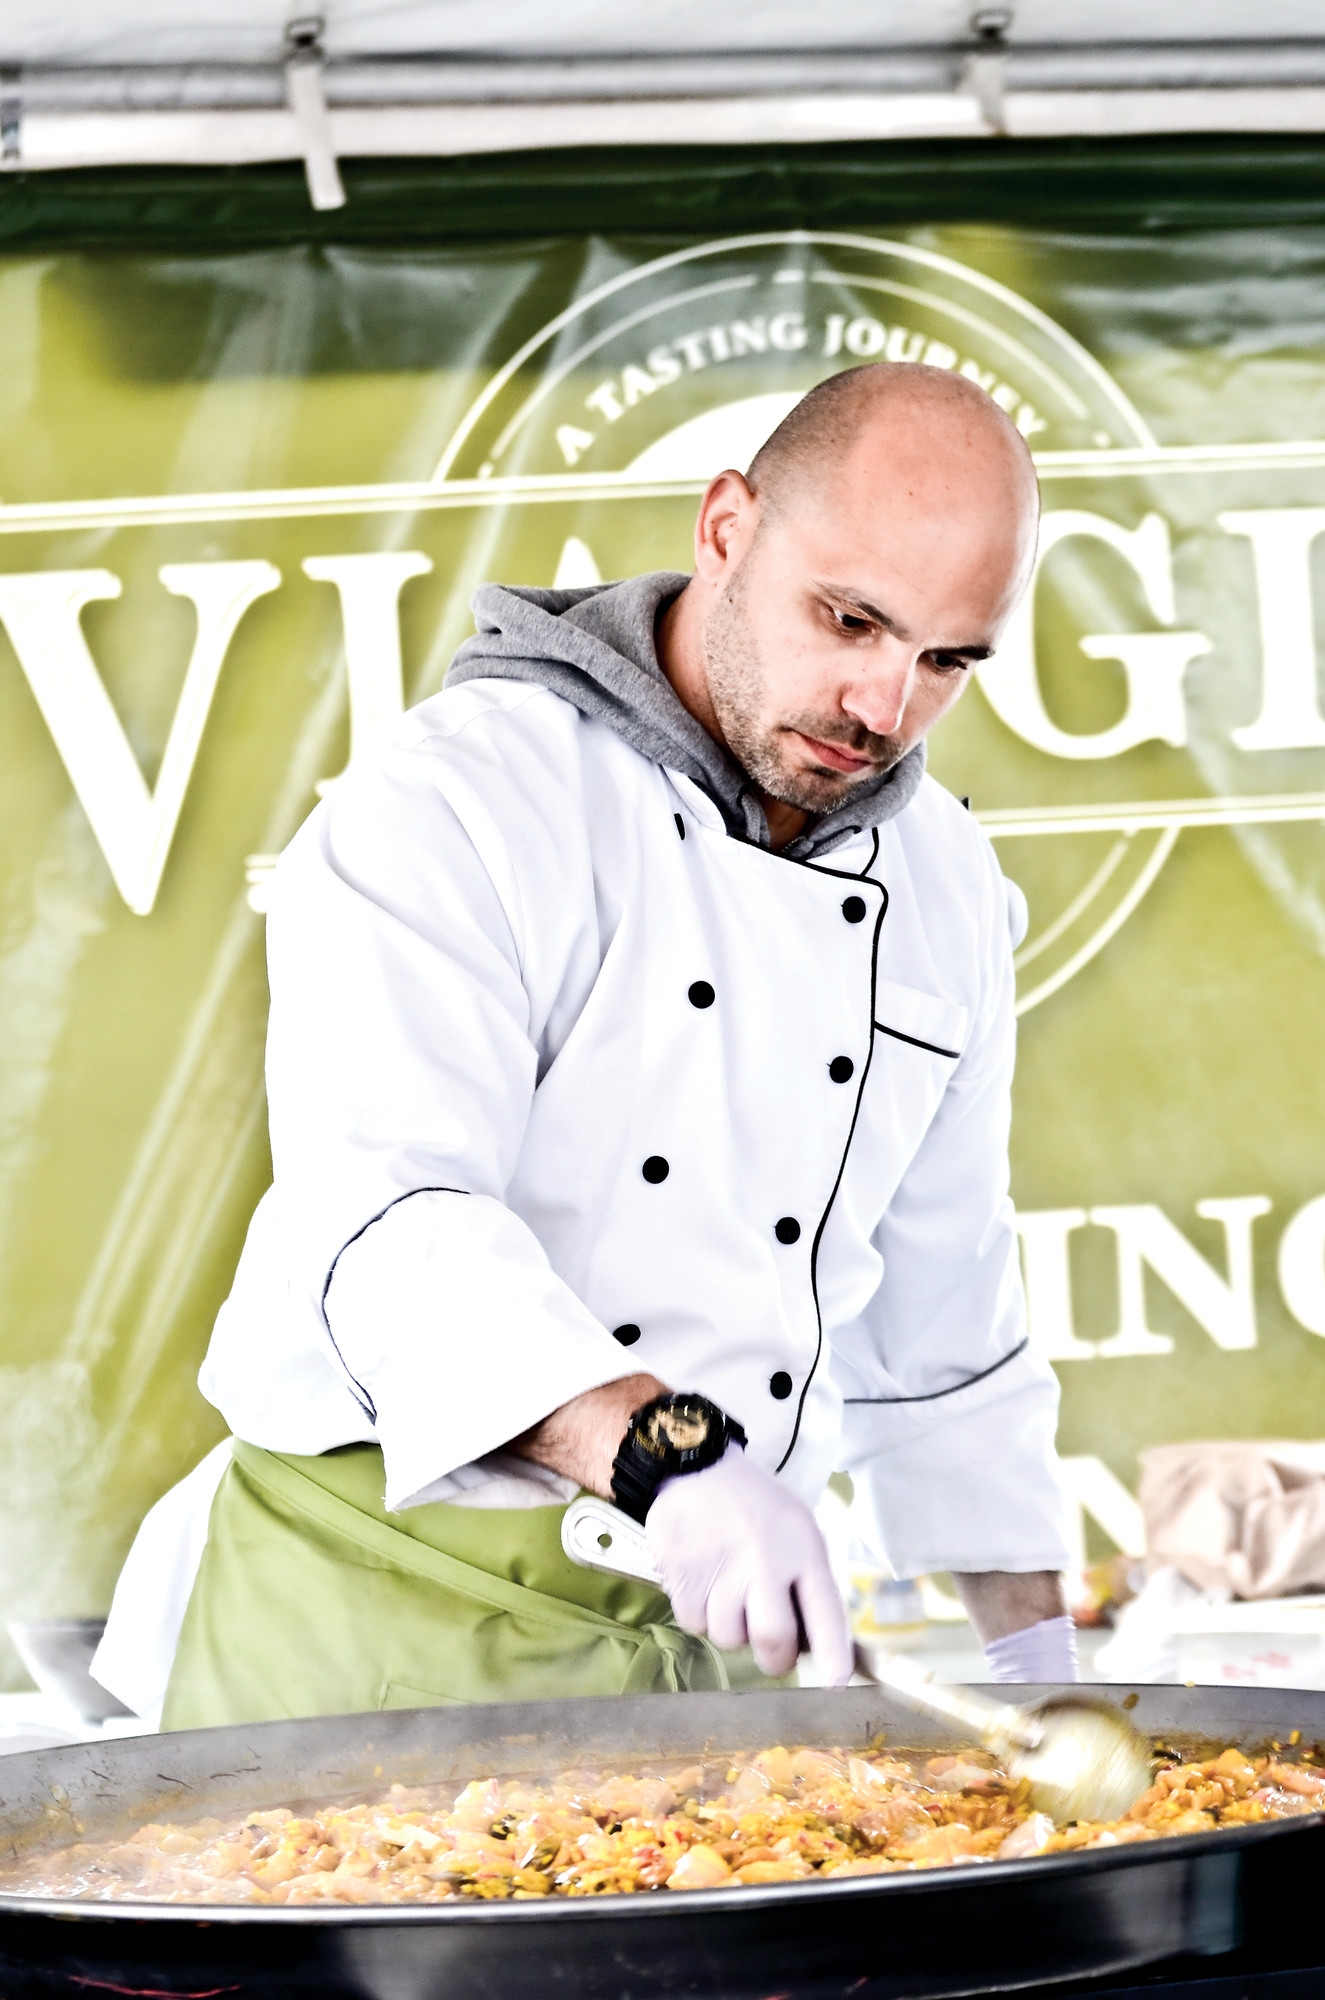 Chef Alex Bujoreanu of Viaggio Tapas cooked up food at last year’s festival. This year will see even more chefs showing off their culinary skills.